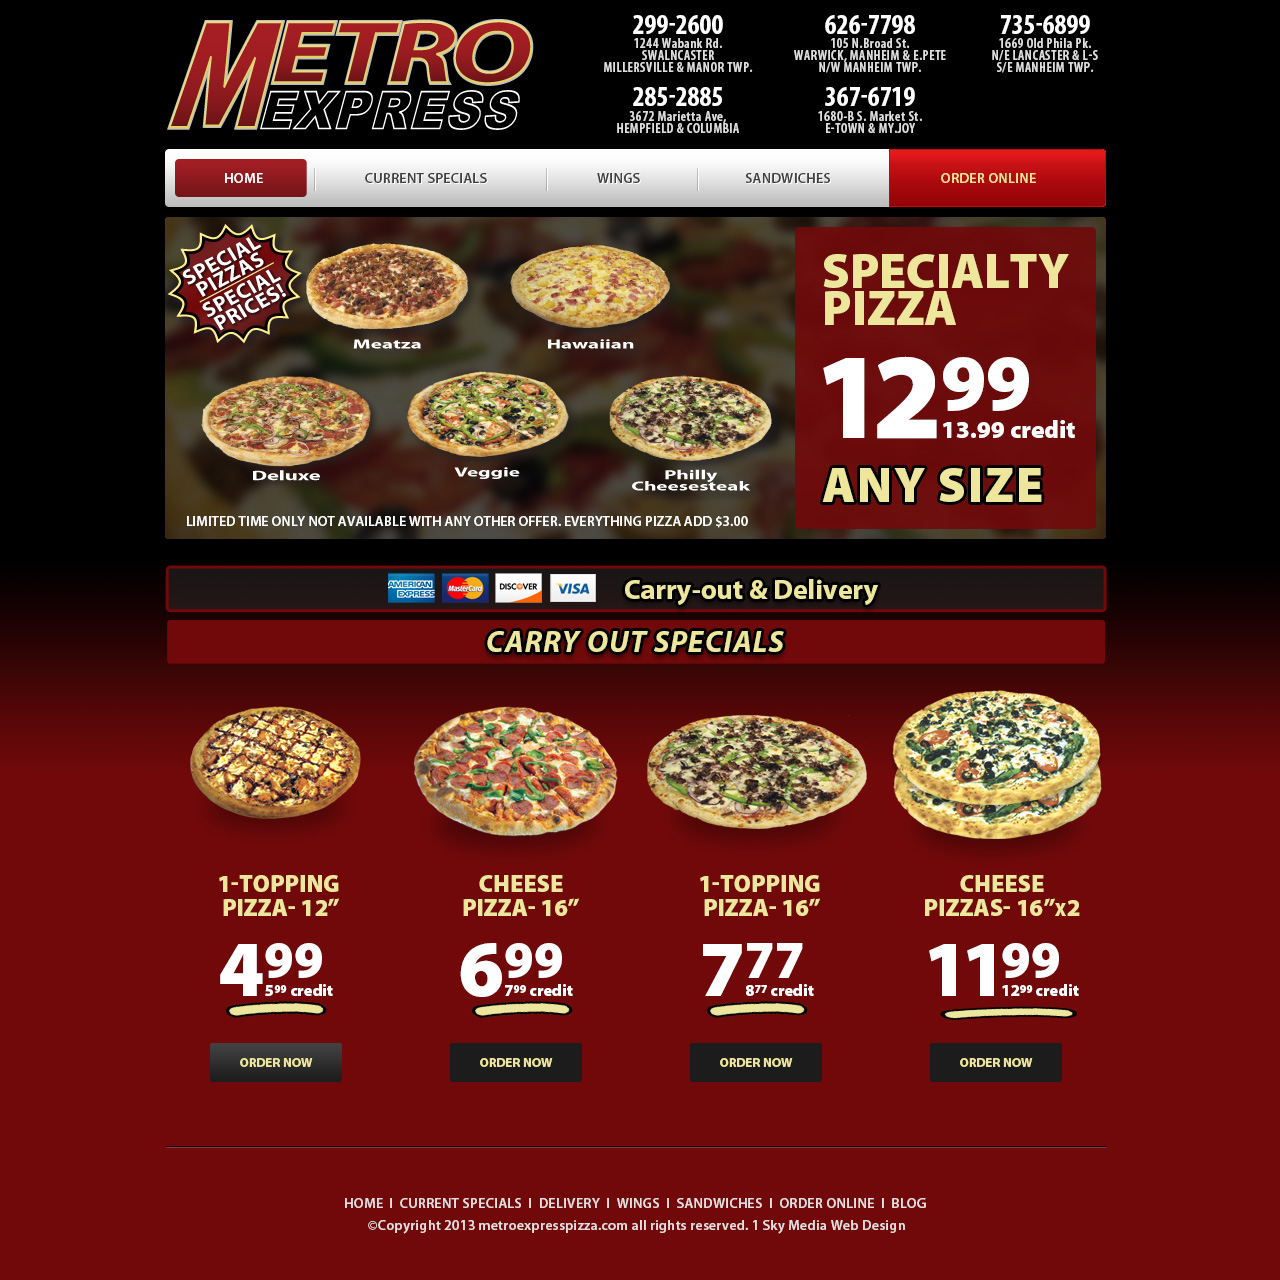 Metro Express Pizza Delivery - pizza delivery company website design